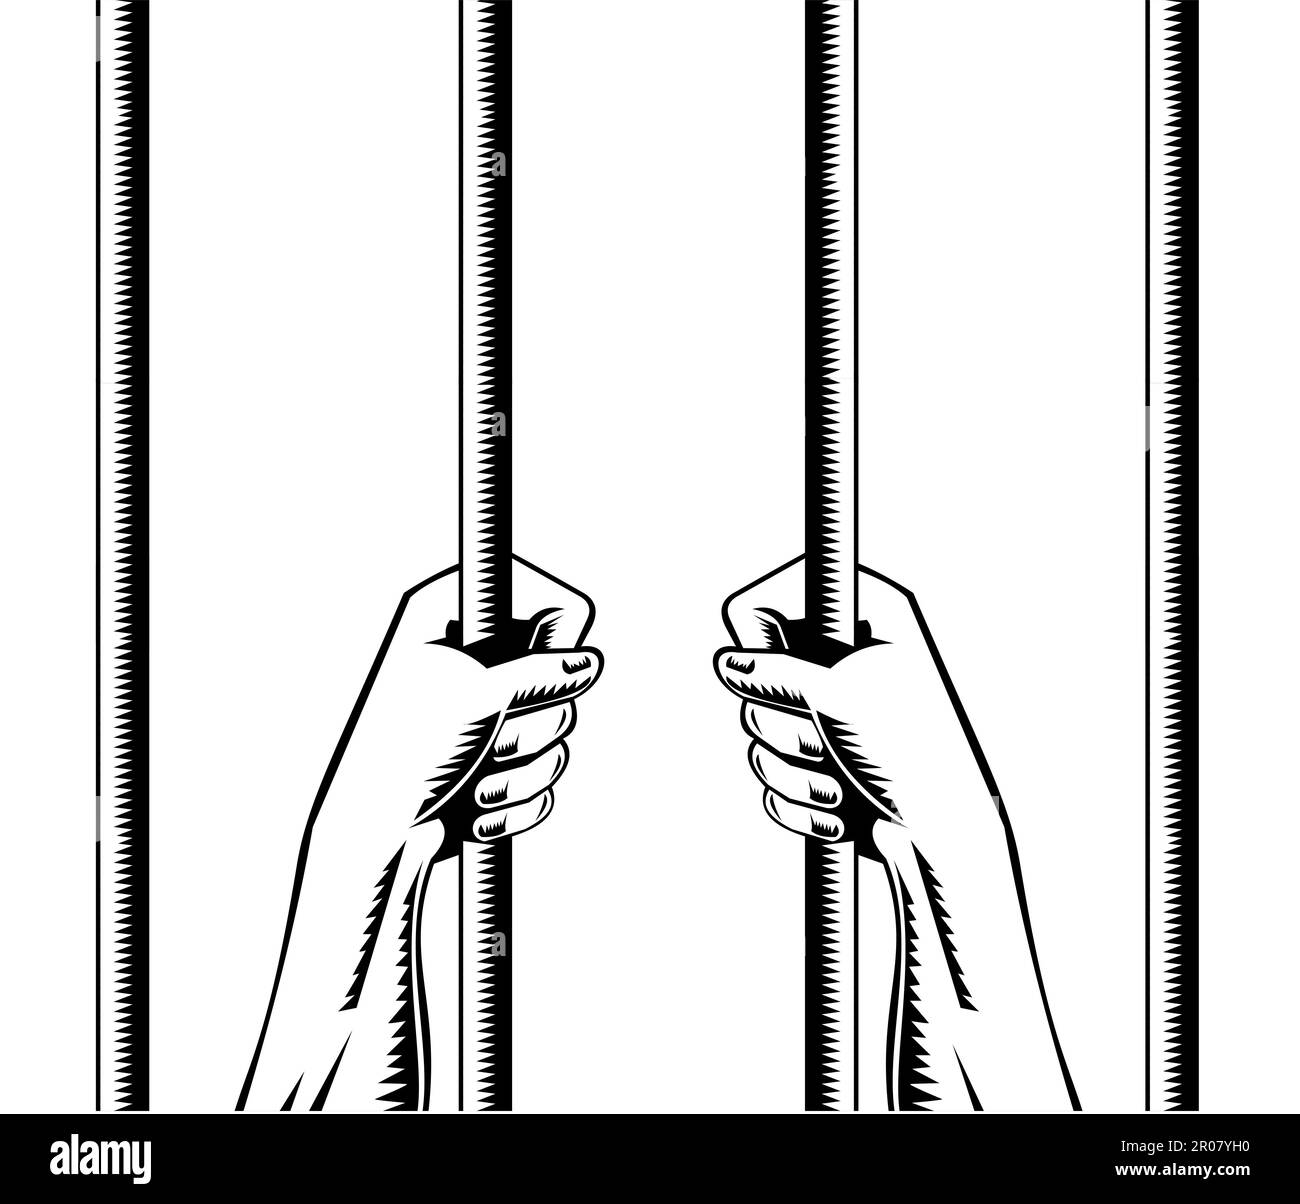 Illustration of a pair of prisoner hands holding gripping prison bar isolated background done in retro woodcut style in black and white. Stock Photo